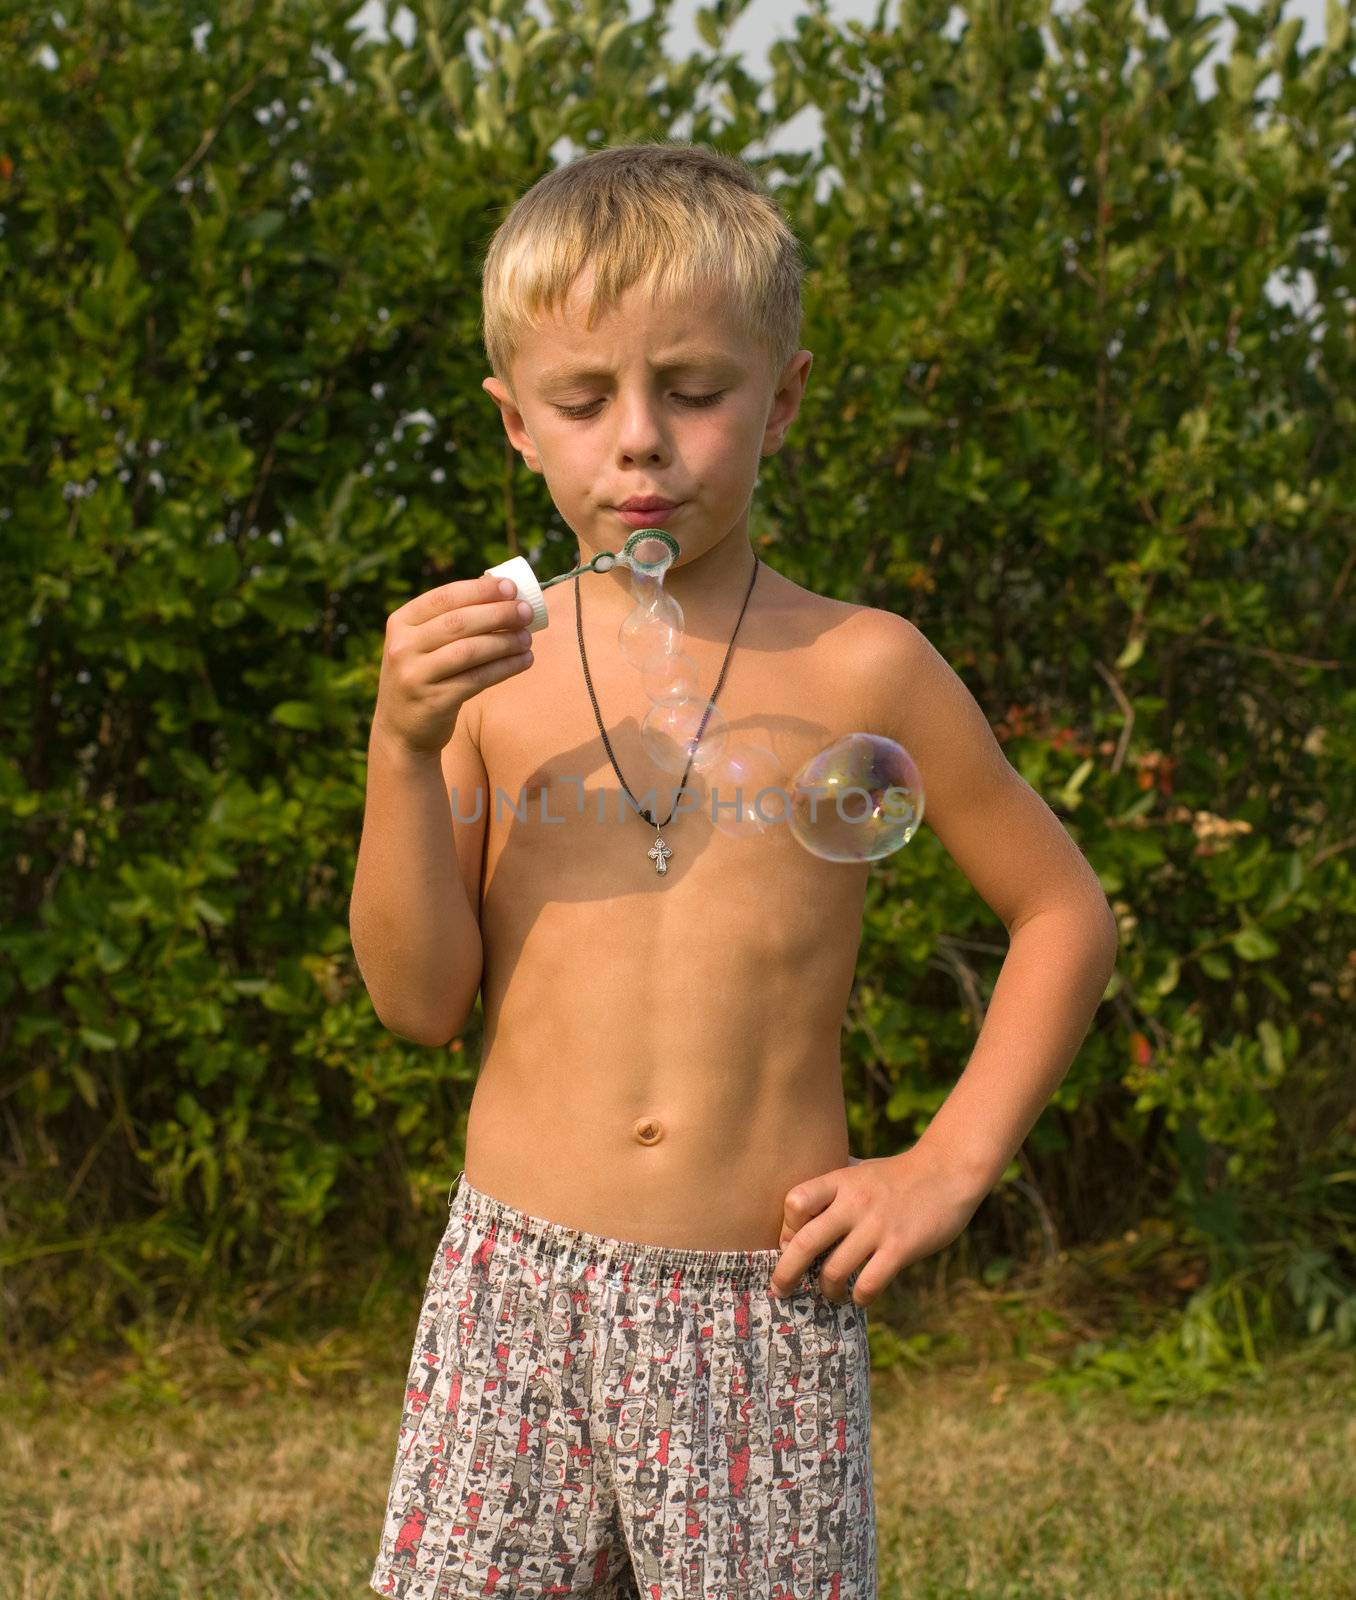 Boy blows bubbles in the garden on a summer day.